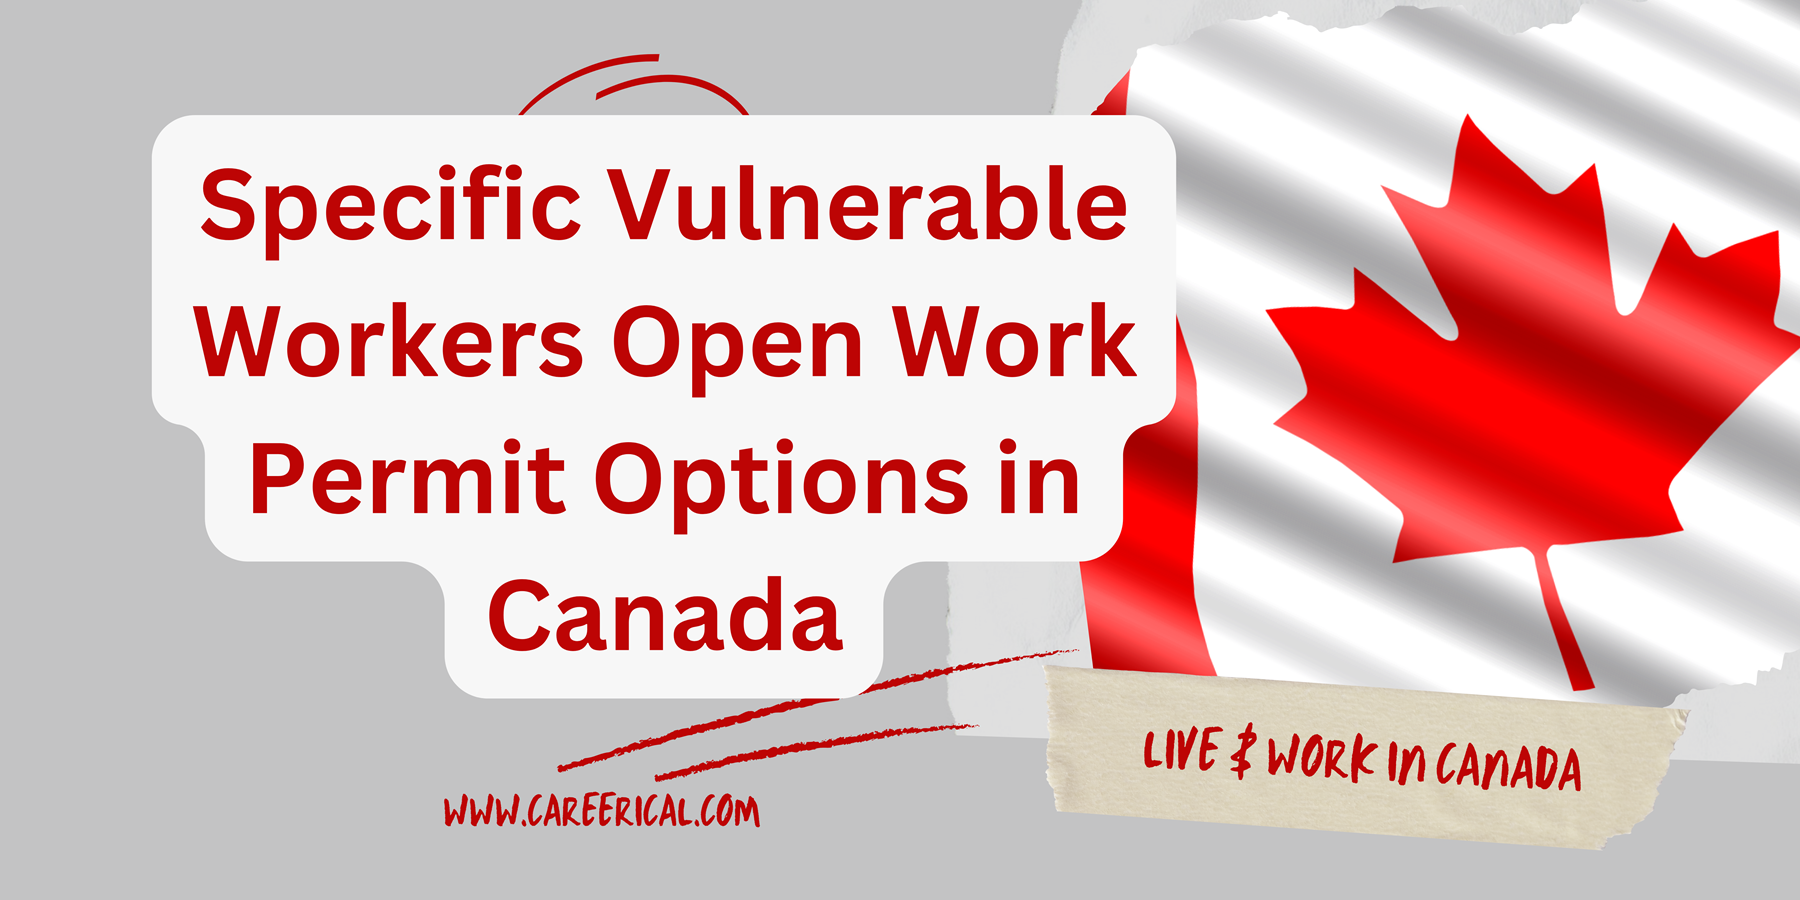 Specific Vulnerable Workers Open Work Permit Options in Canada